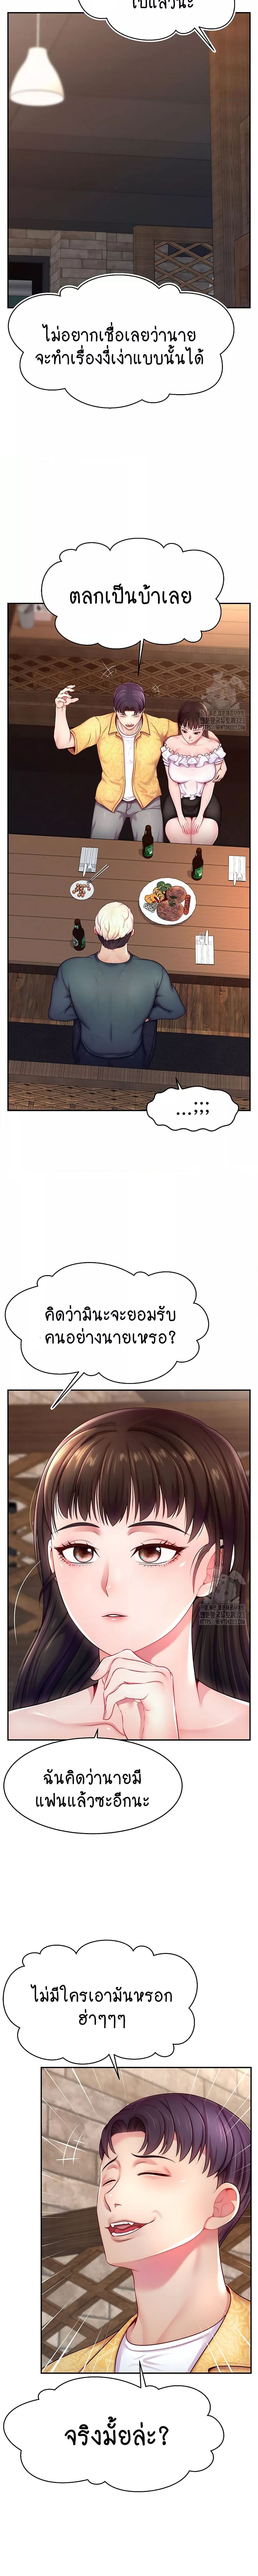 Making Friends With Streamers by Hacking! ตอนที่ 10 ภาพ 8